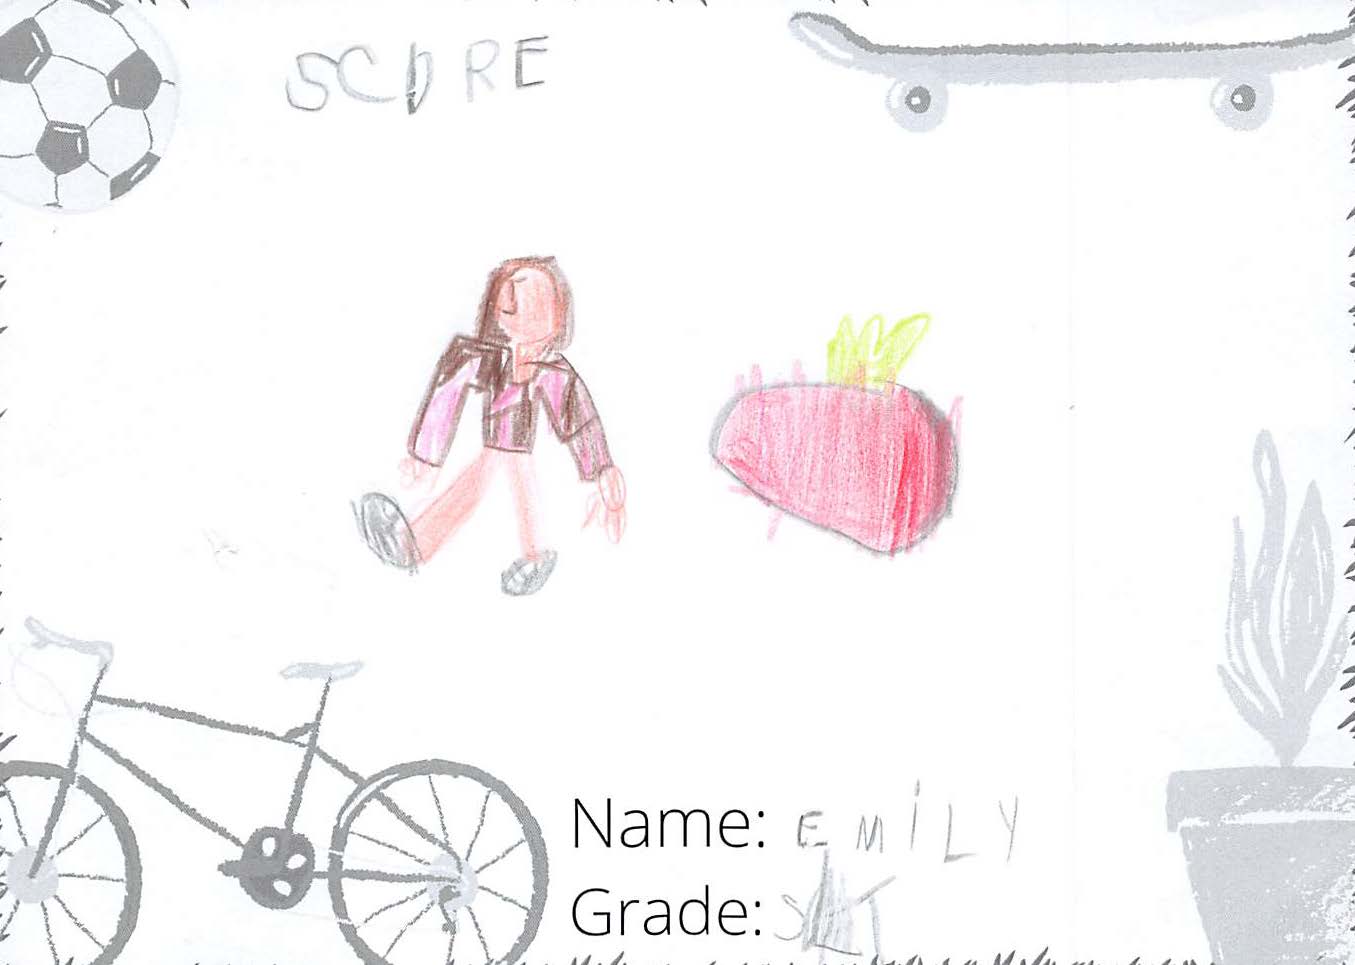 Pencil crayon drawing for the SCORE! logo contest. The drawing includes a girl standing next to an apple.